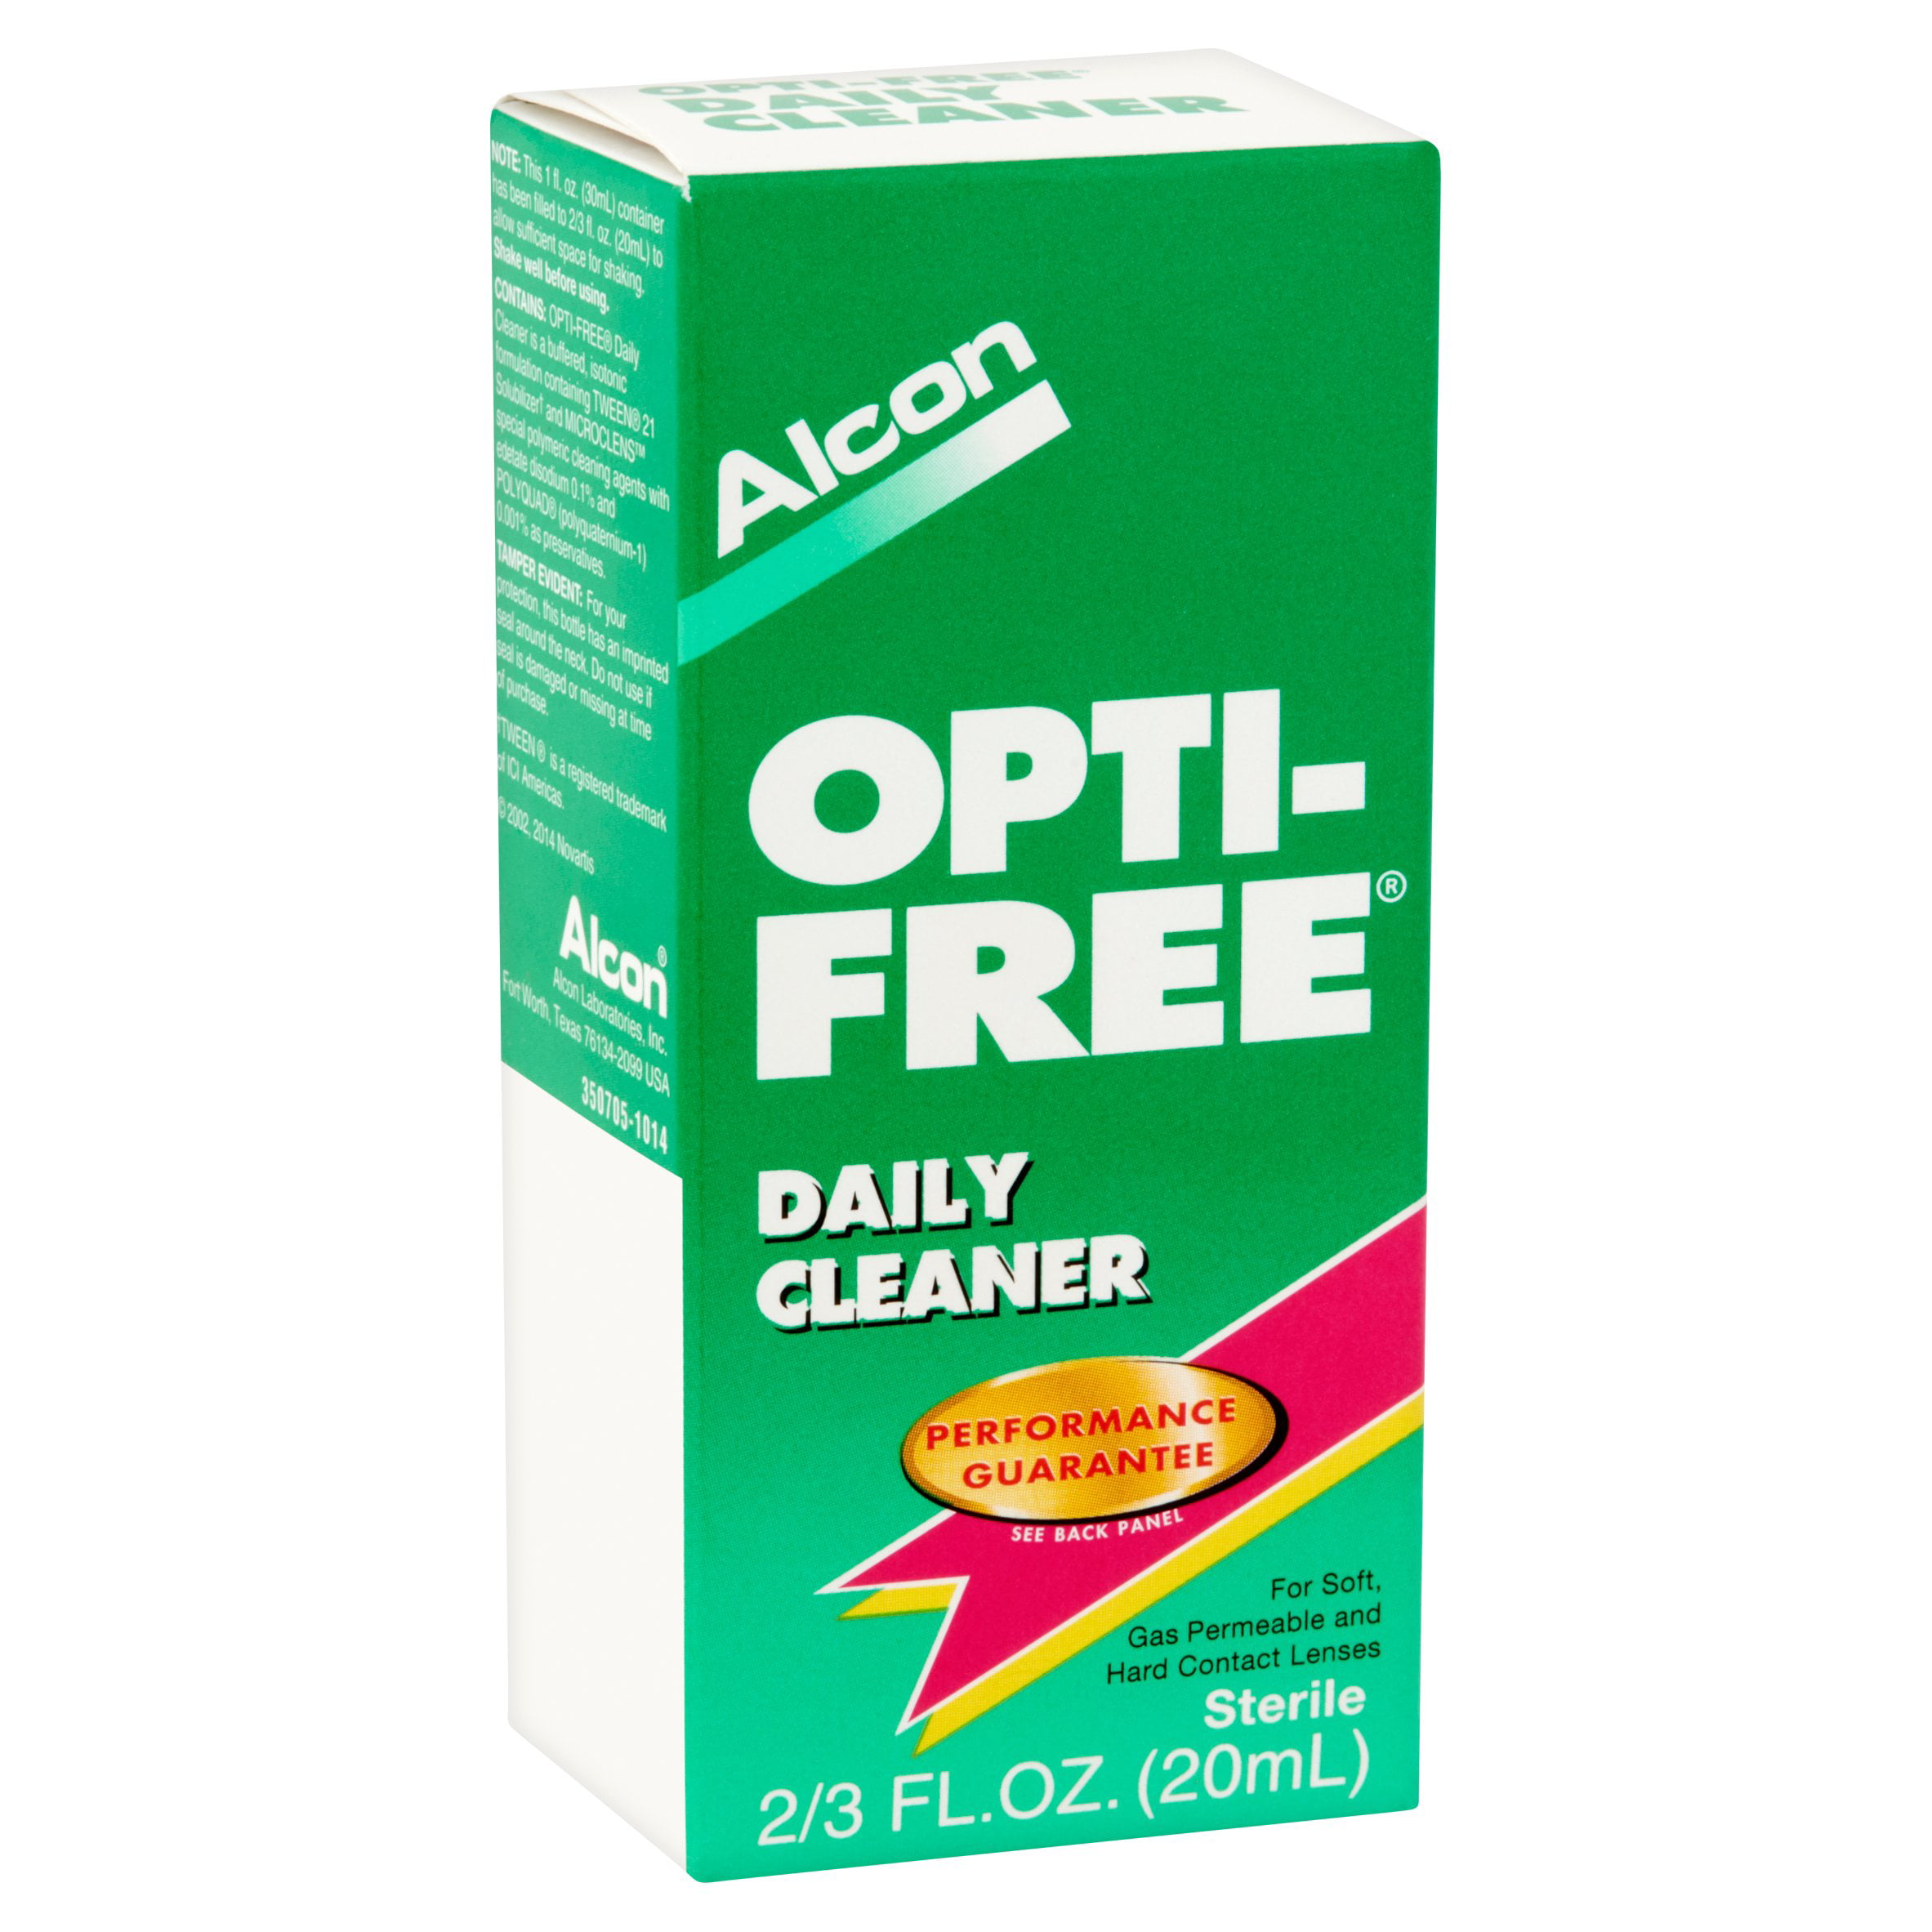 Alcon opti clean daily cleanser centers for medicare and medicare services hours